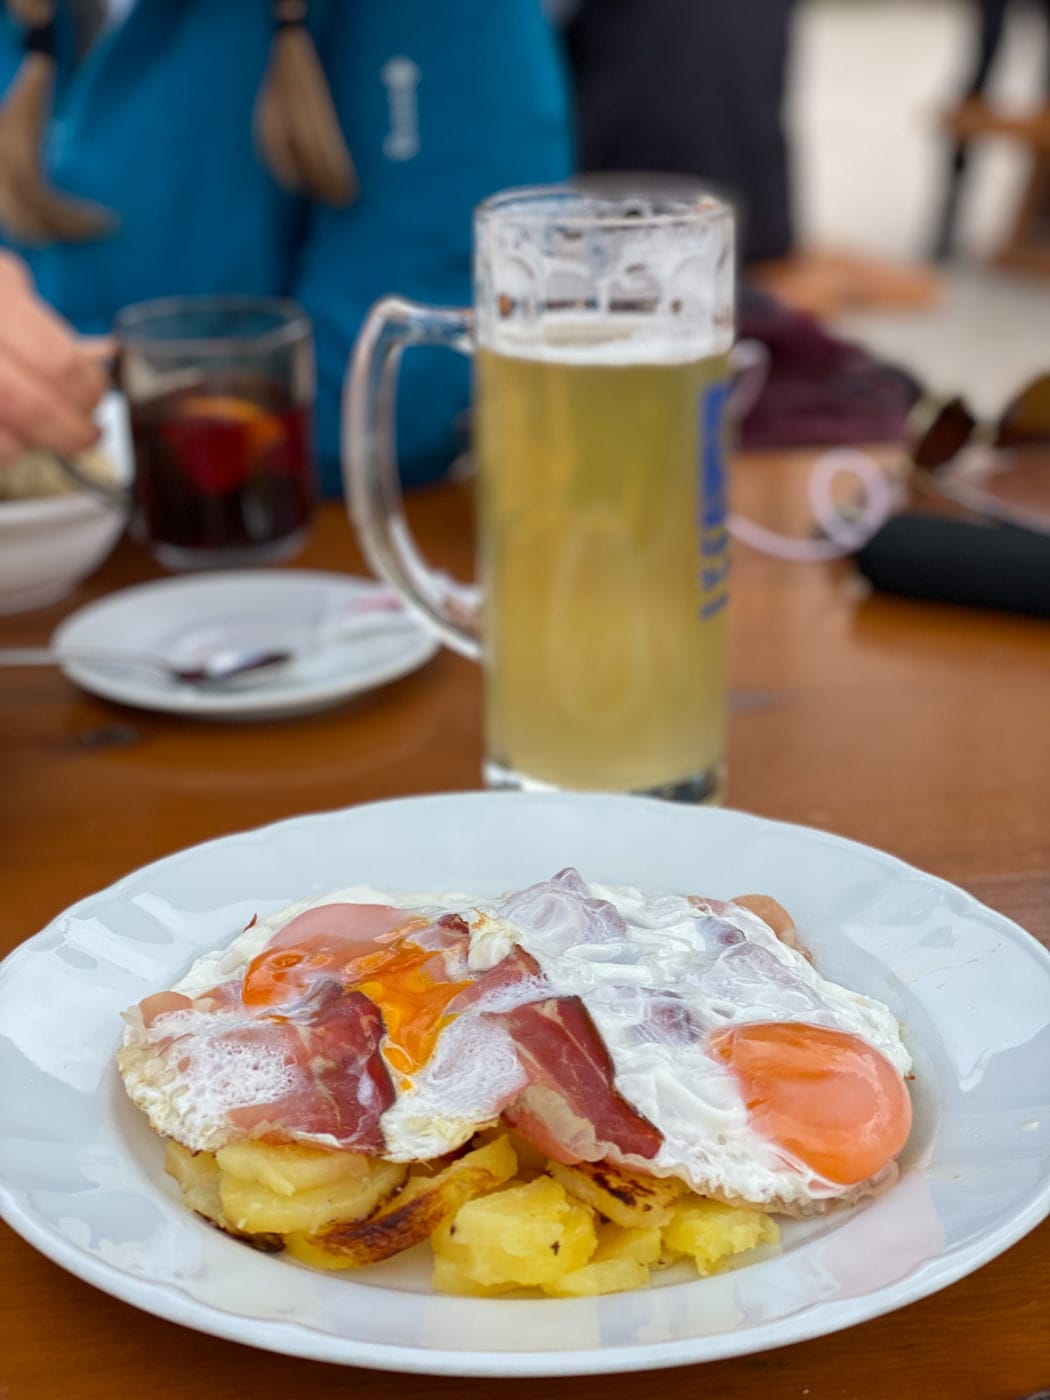 sunnyside-up eggs and potatoes with a radler beer as a typical lunch in south tyrol, italy